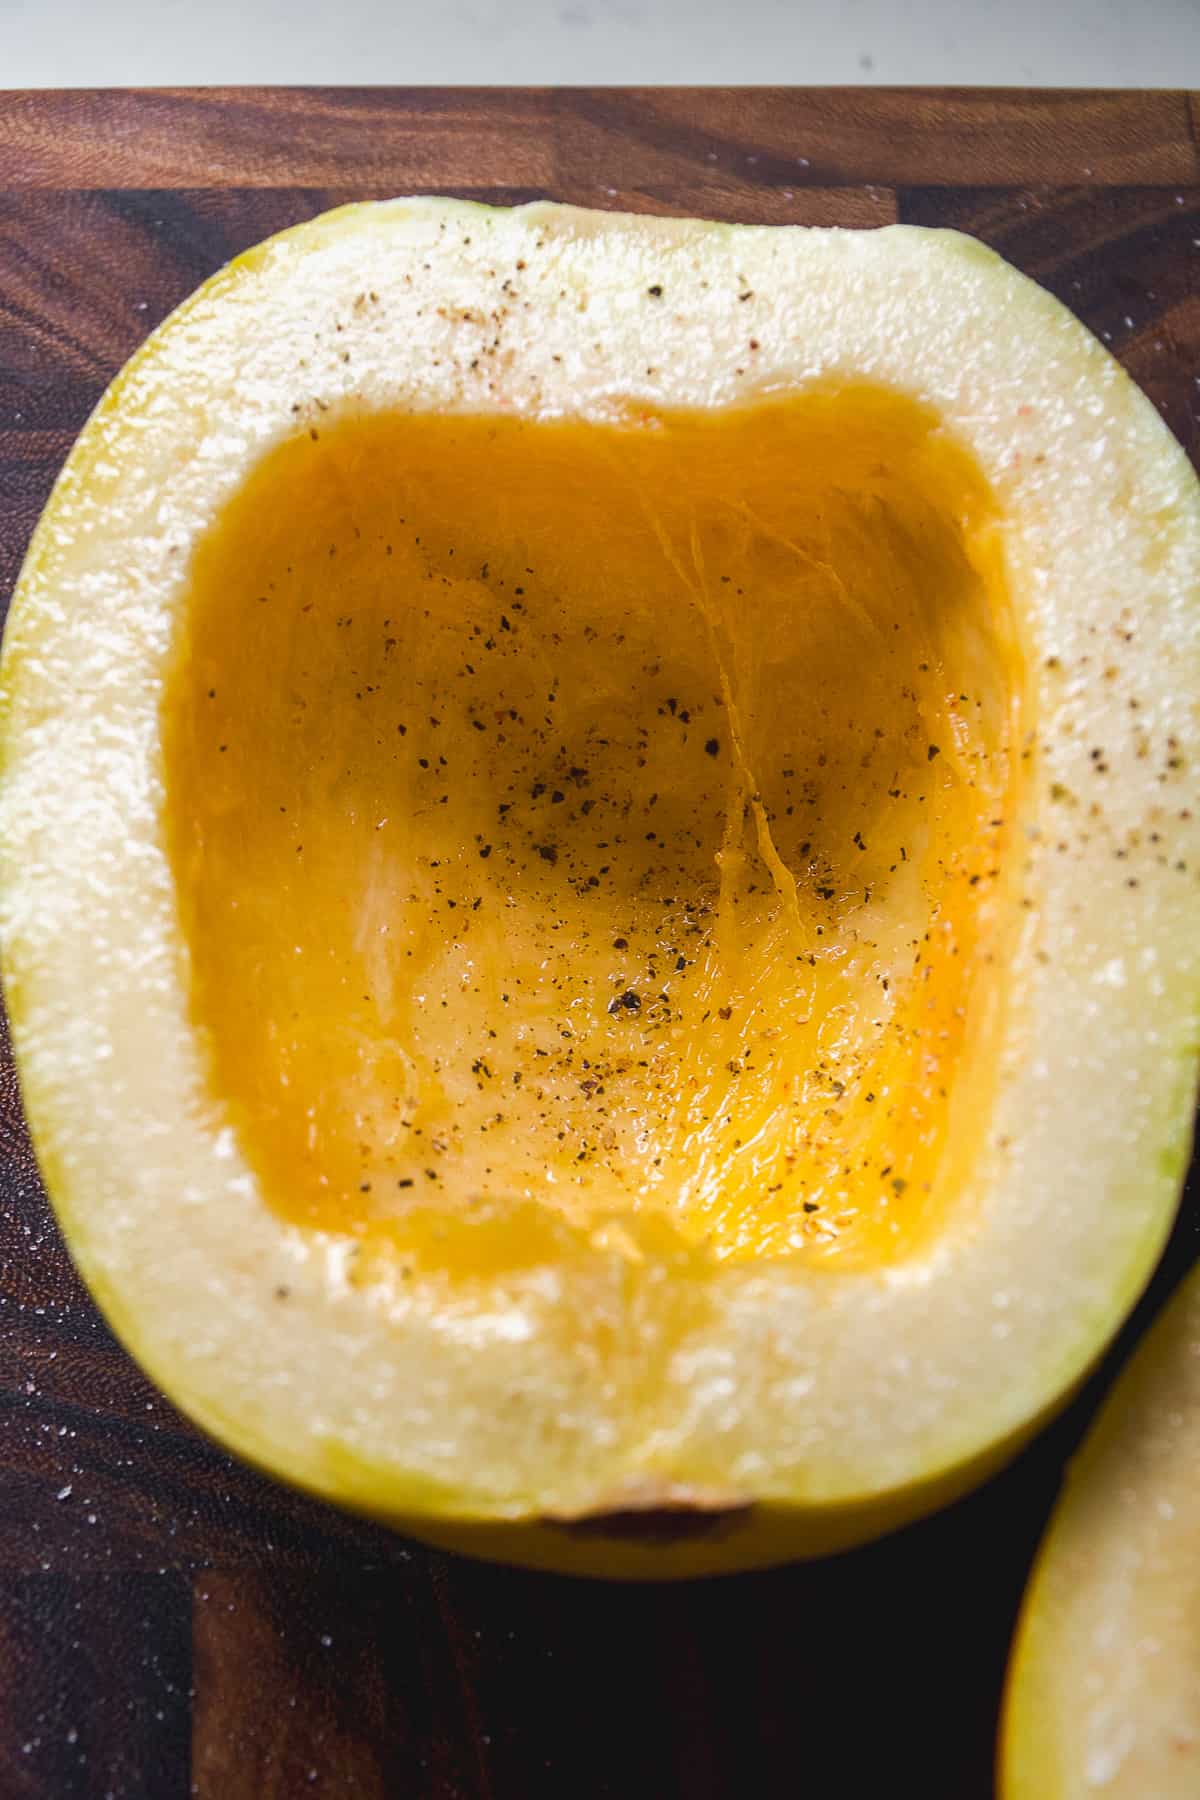 Spaghetti squash with olive oil, salt, and pepper about be roasted.